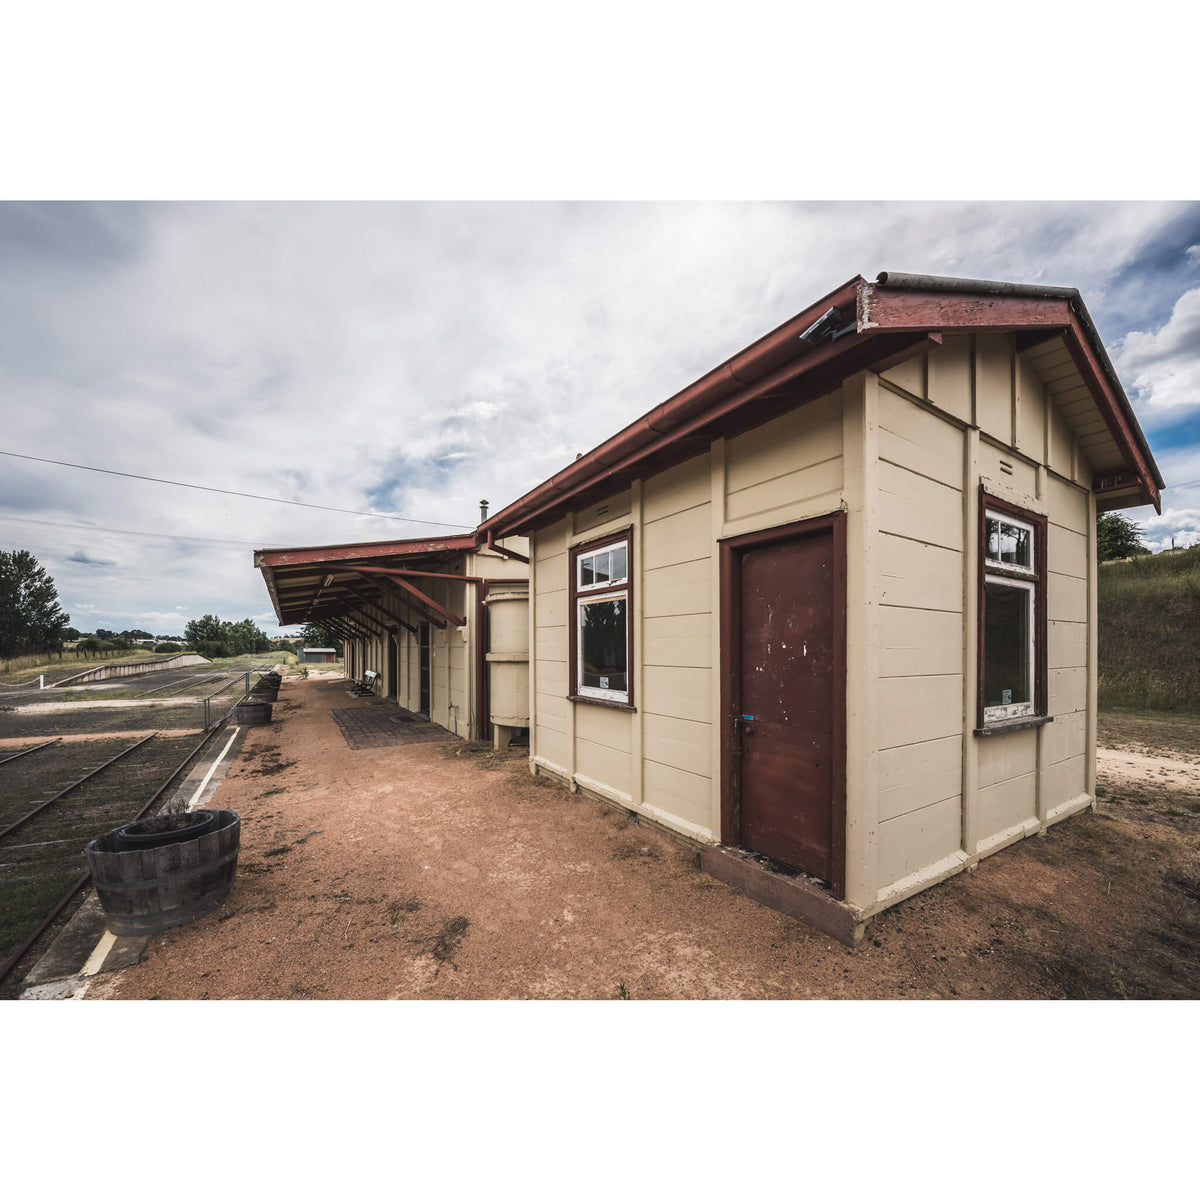 Lever Room | Bombala Station Fine Art Print - Lost Collective Shop